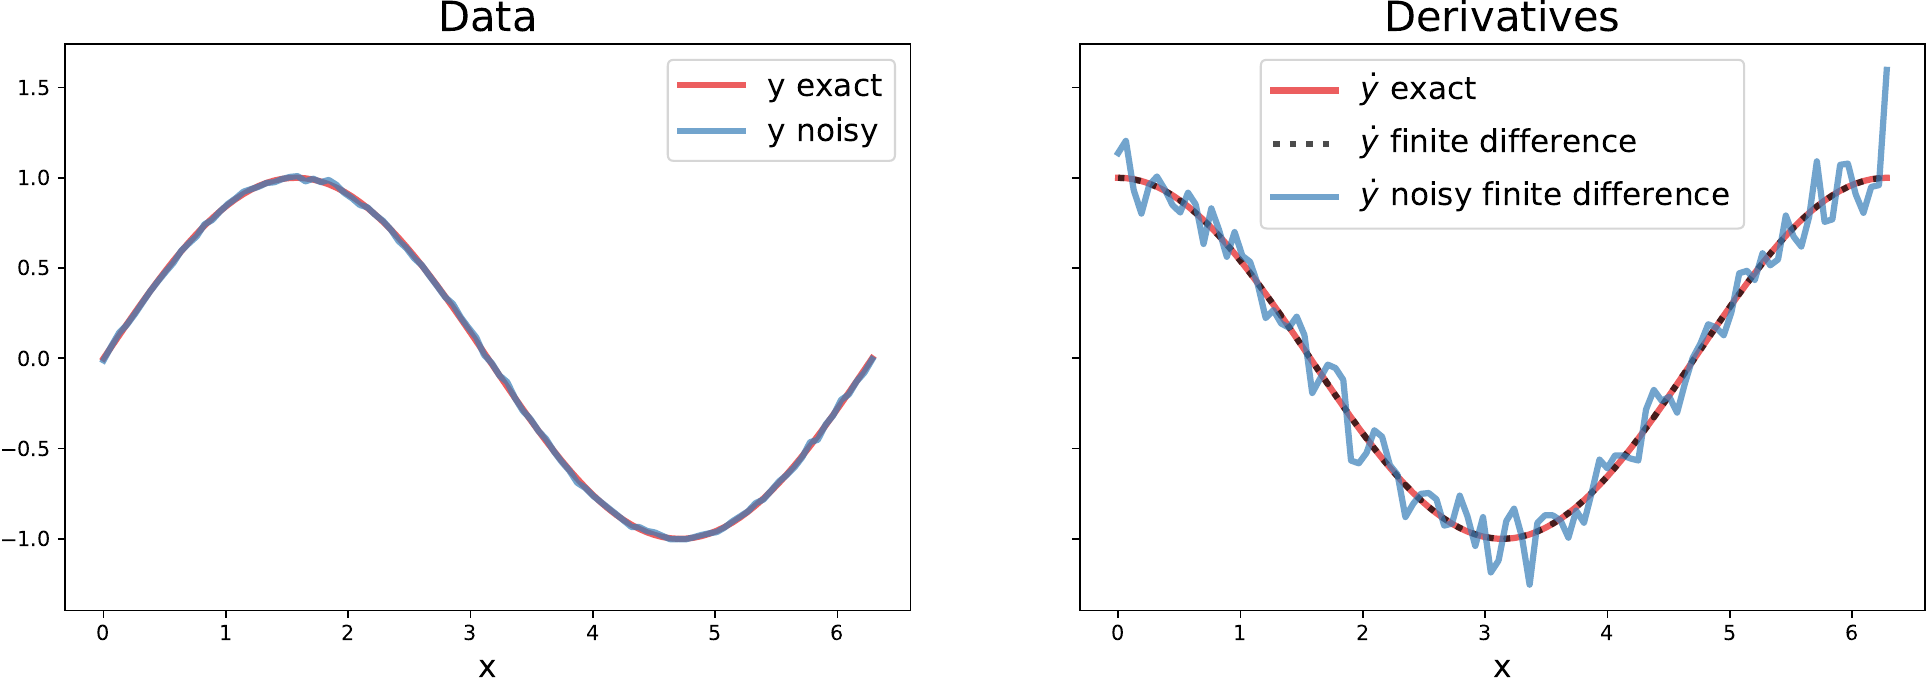 A toy example illustrating the effect of noise on derivatives computed with a second order finite difference method